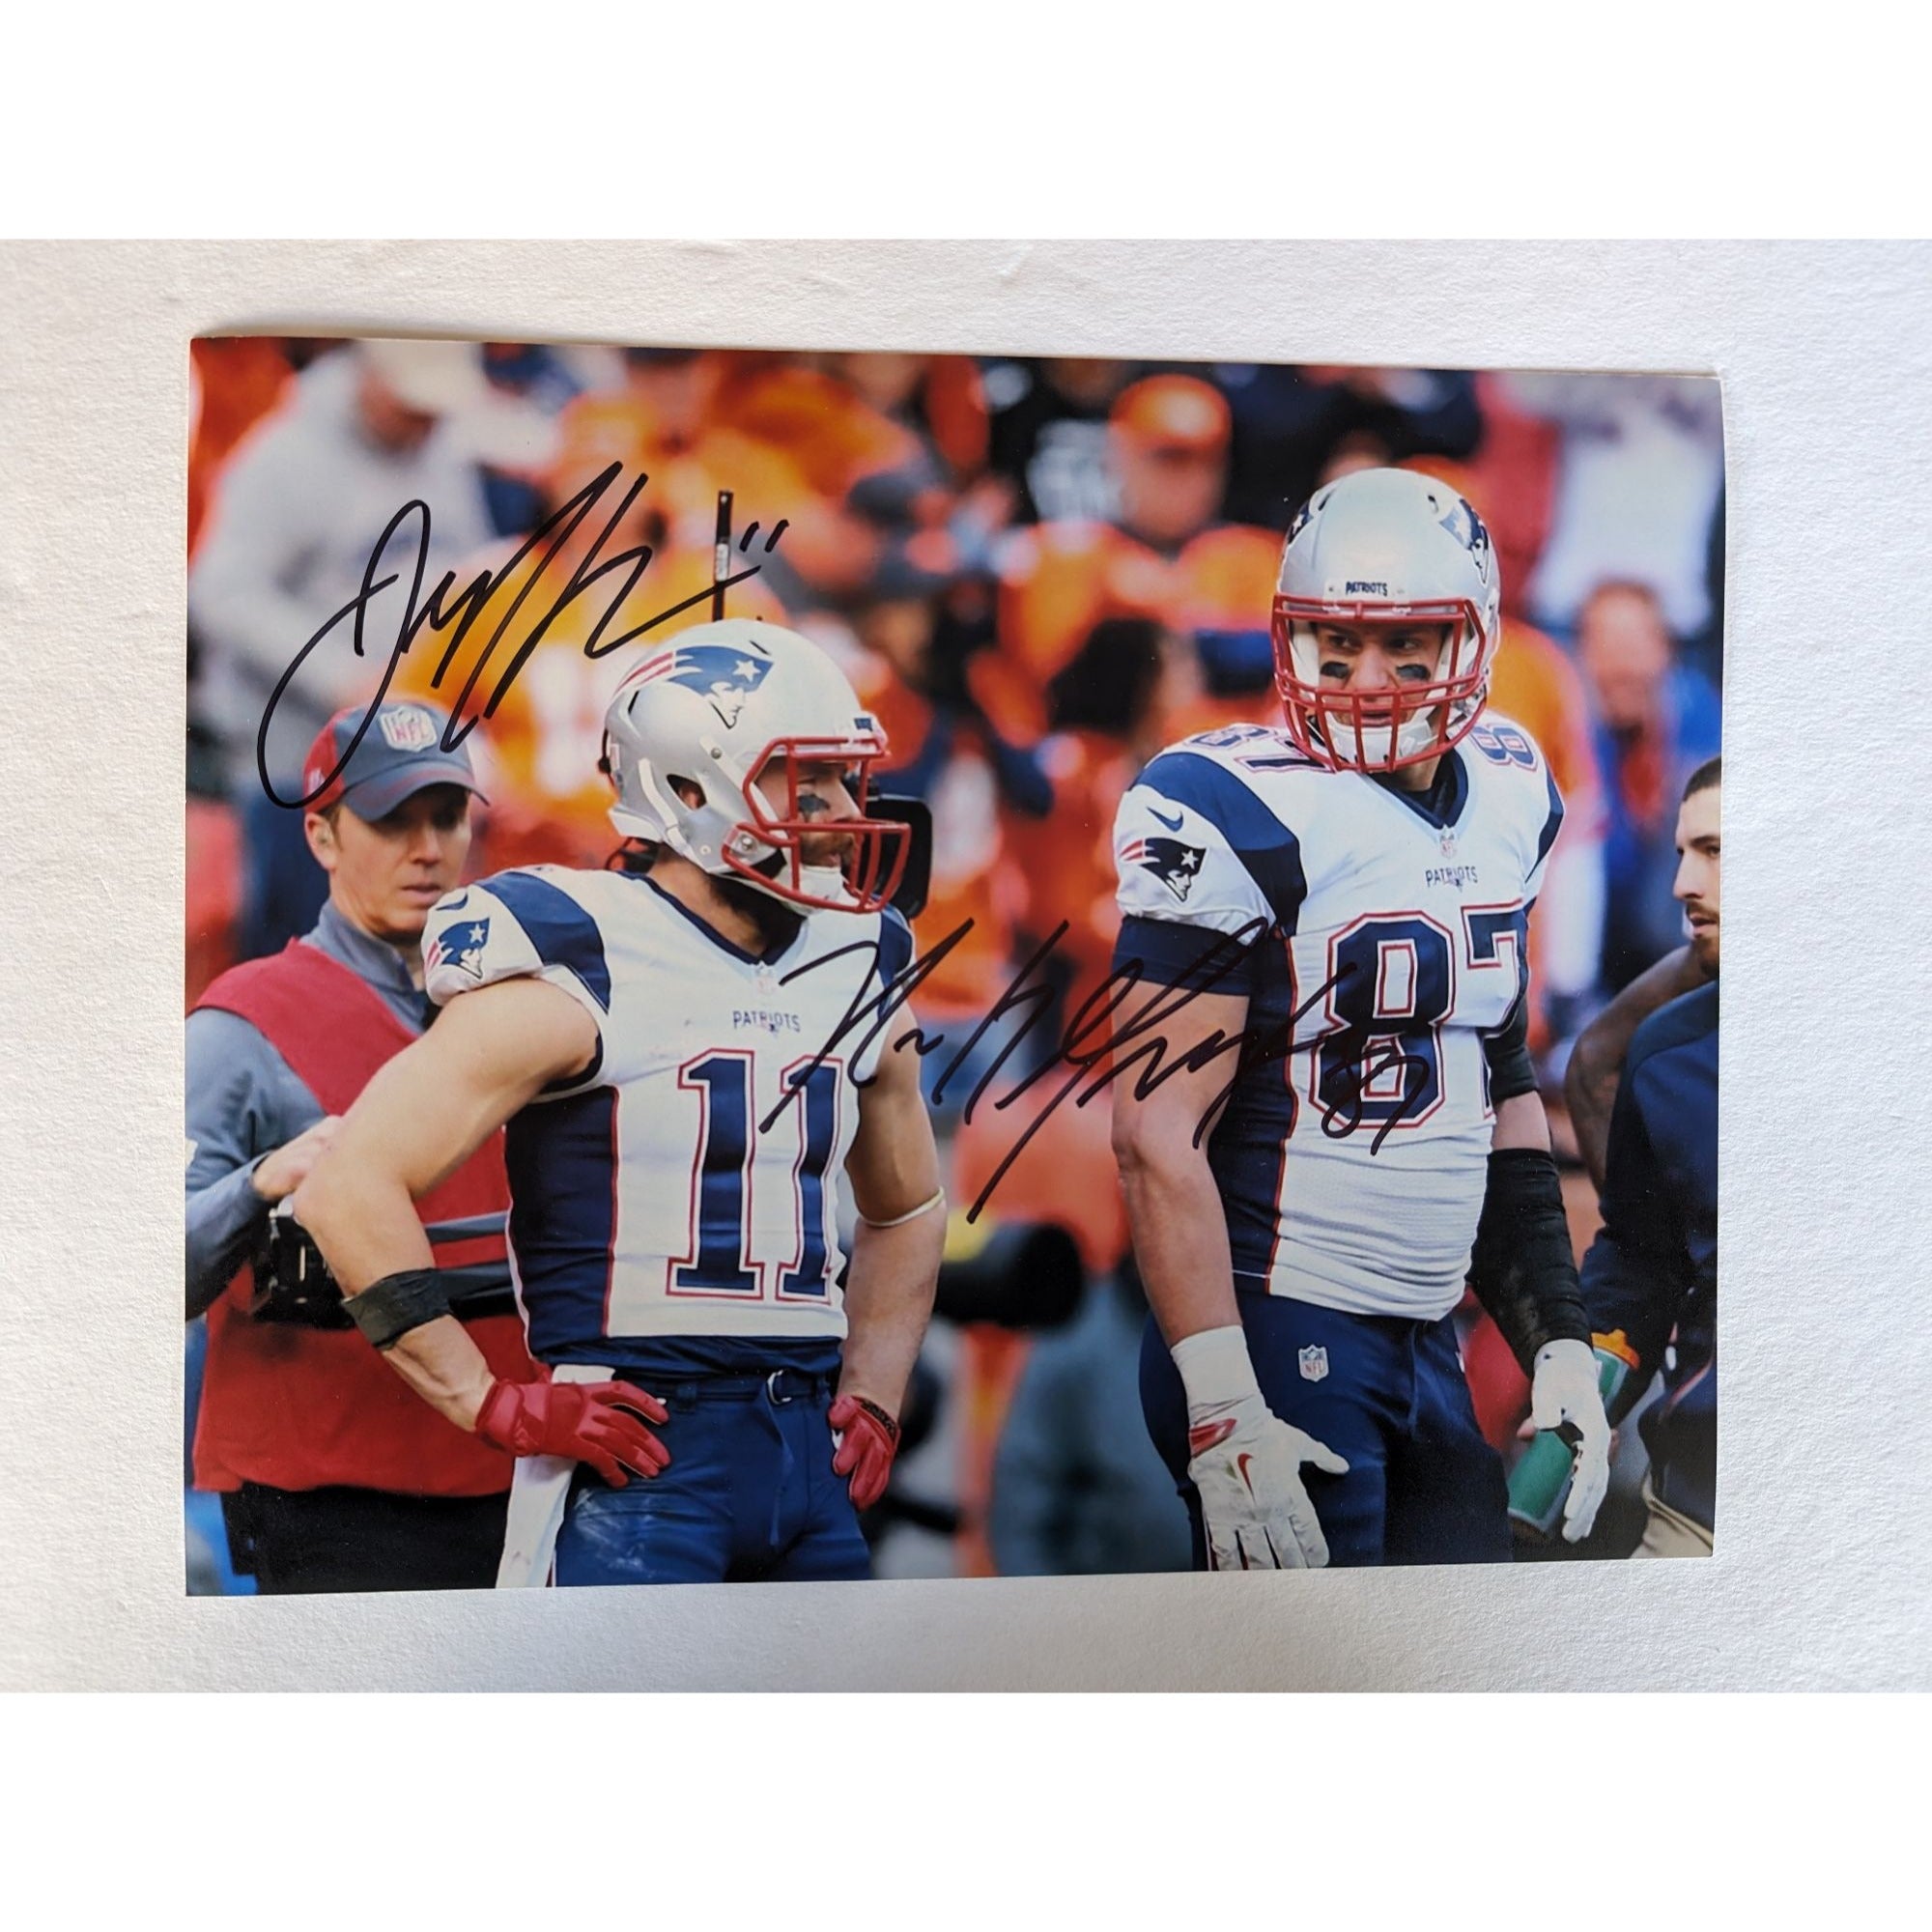 Julian Edelman Rob Gronkowski New England Patriots future NFL Hall of Famers 8x10 photo signed with proof